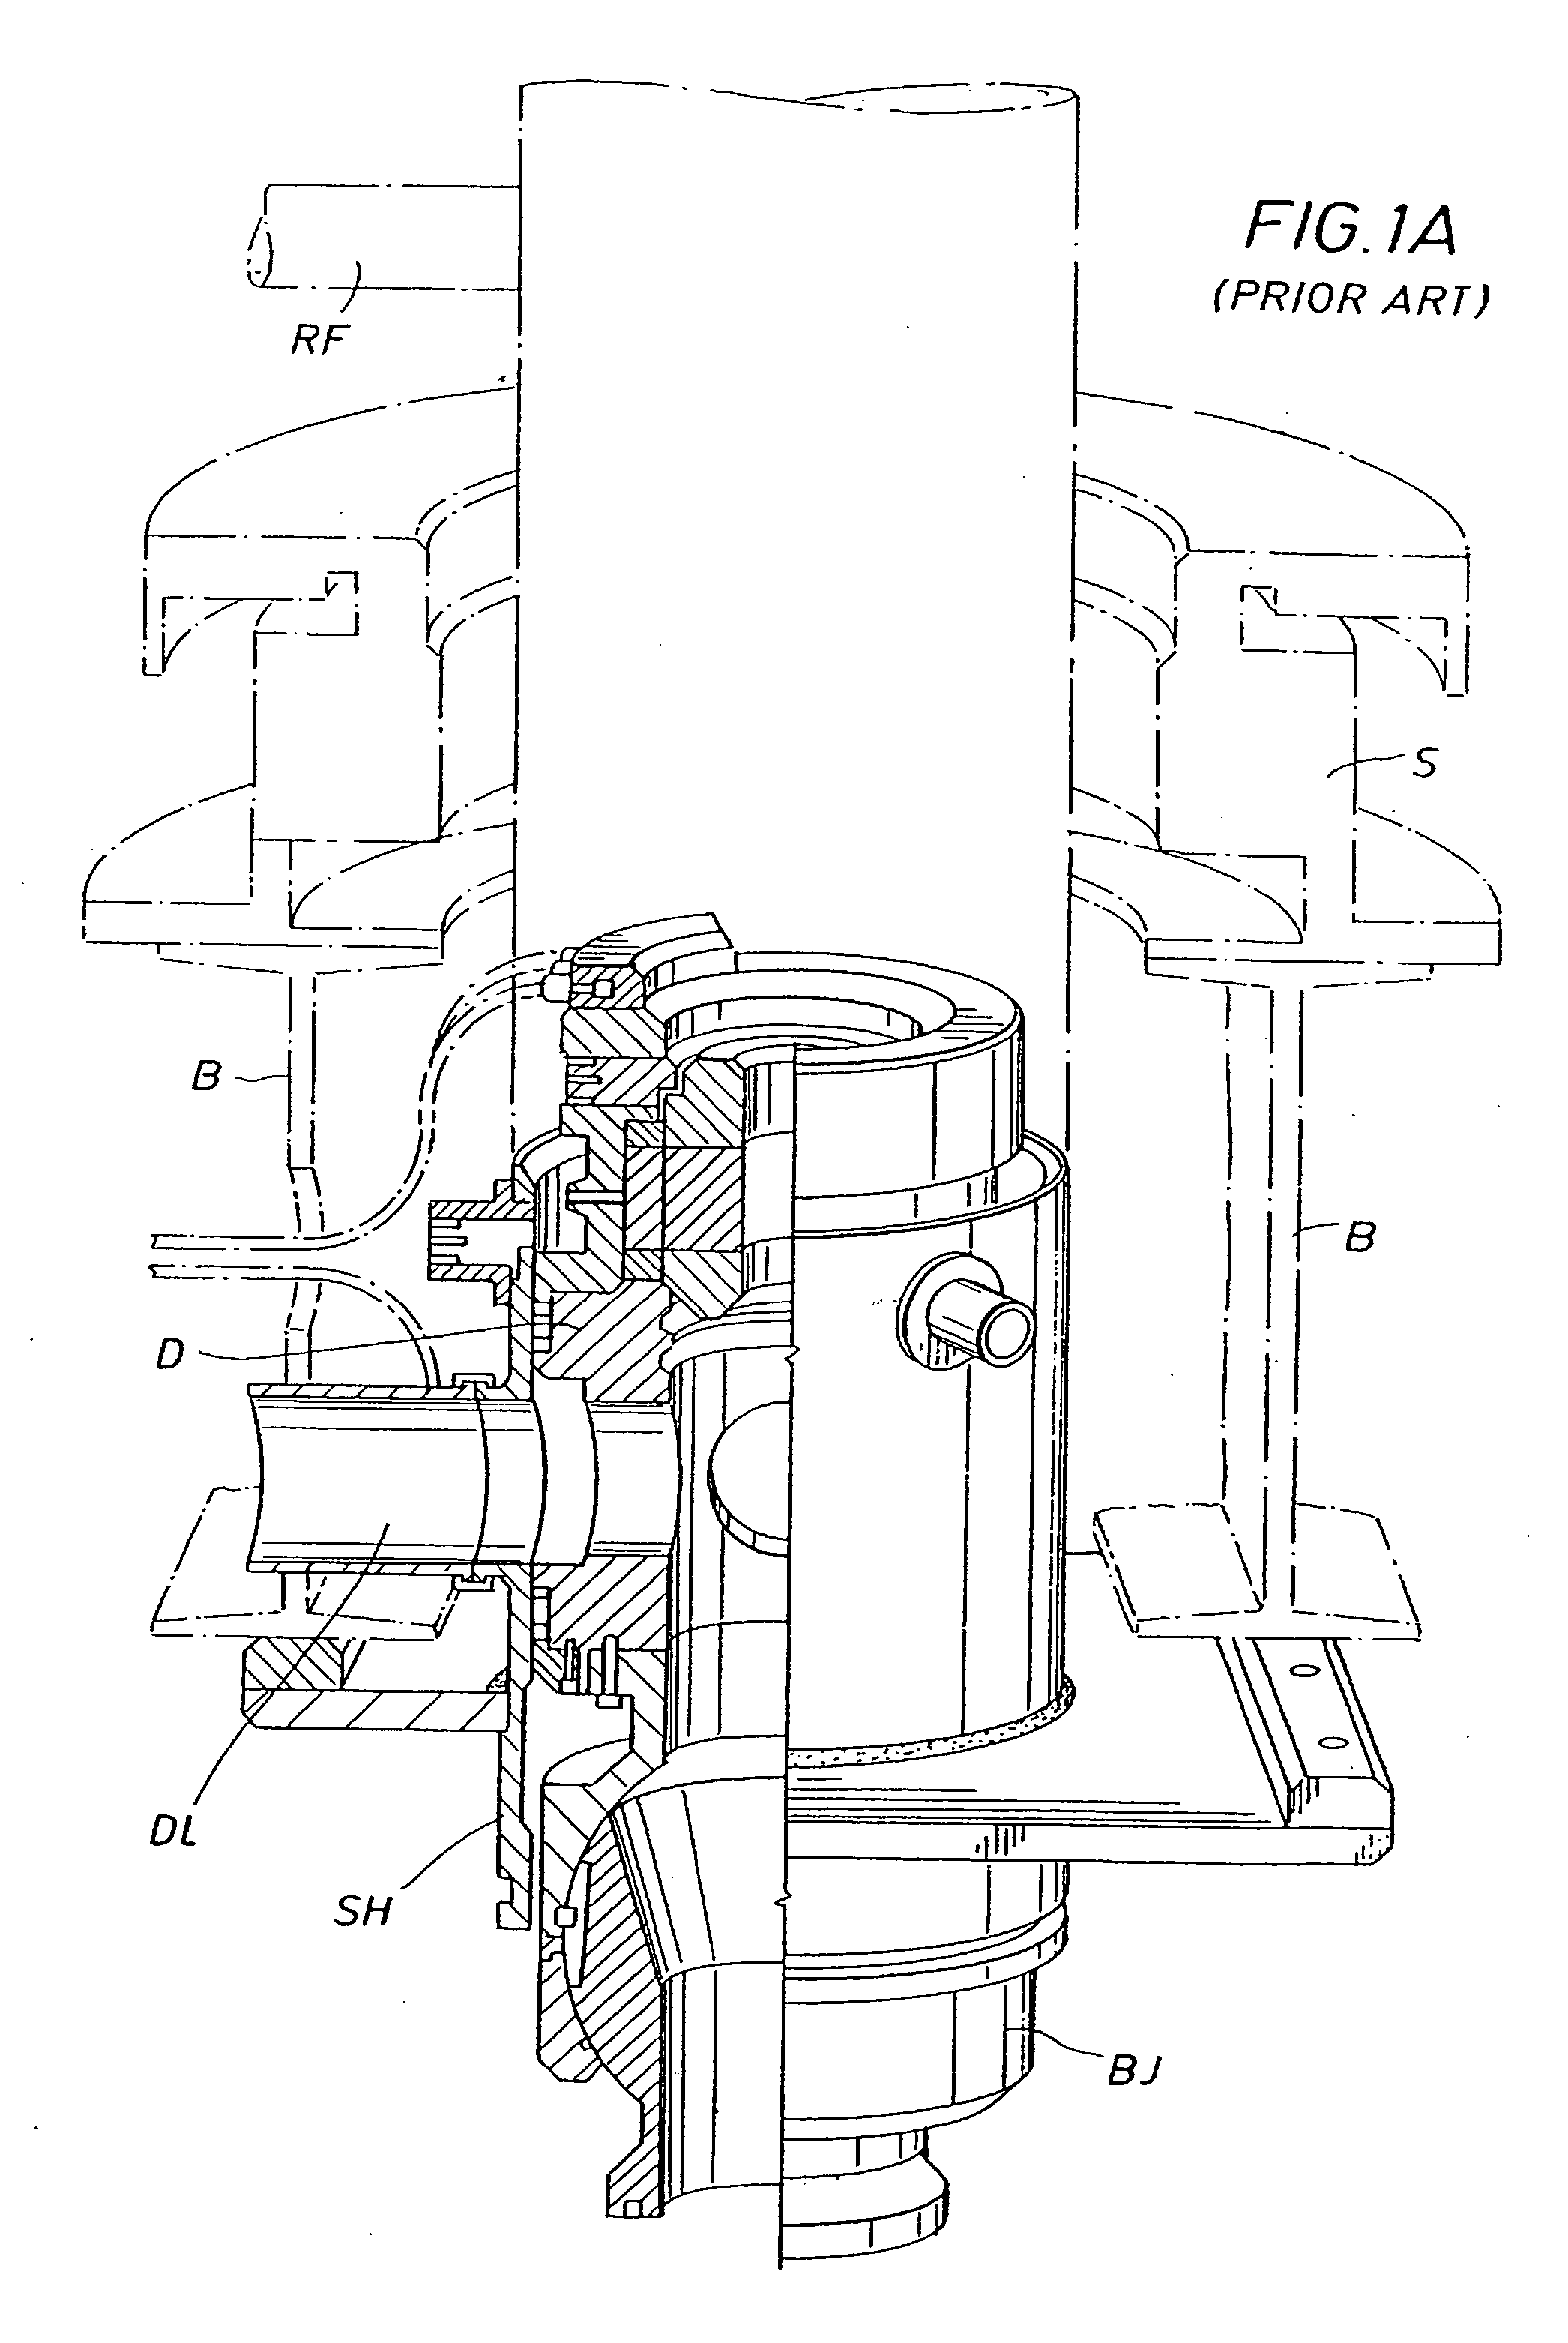 Method for pressurized mud cap and reverse circulation drilling from a floating drilling rig using a sealed marine riser